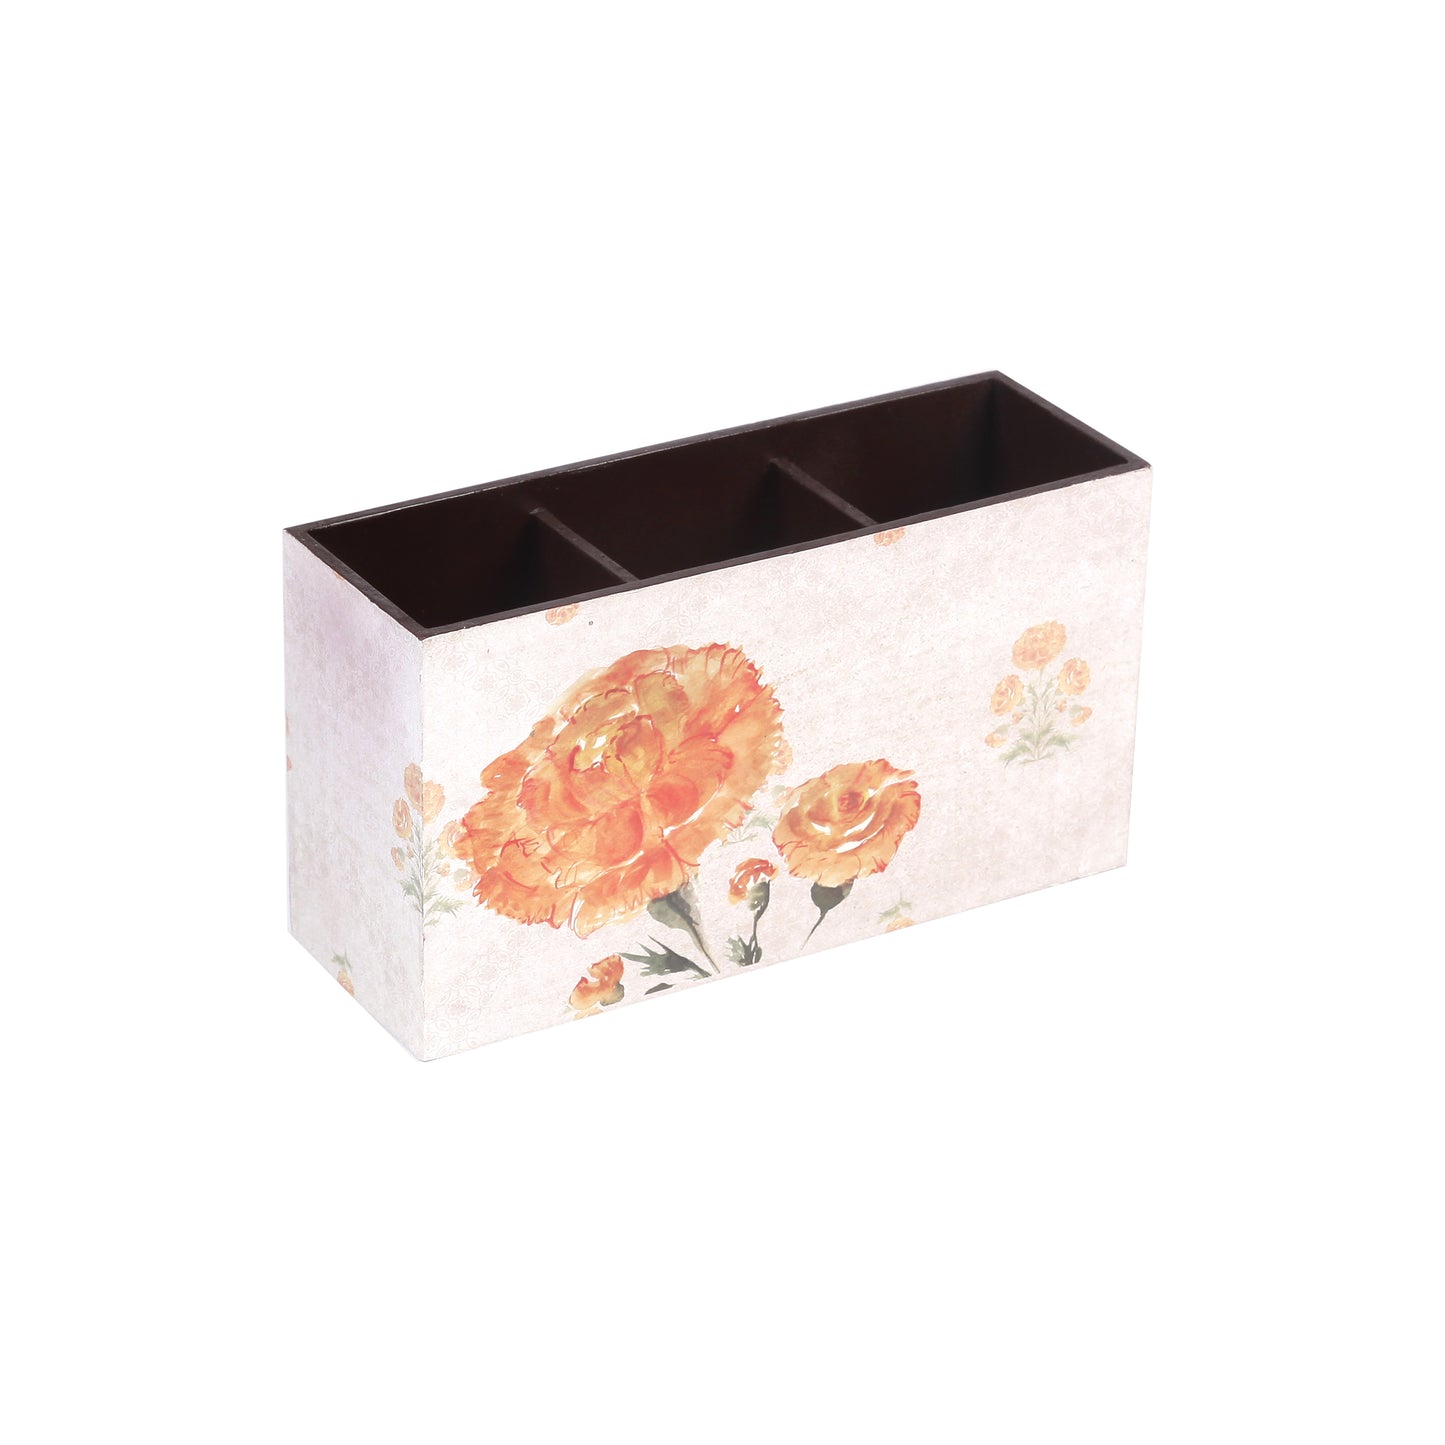 A Tiny Mistake Marigold Wooden Cutlery Holder, 18 x 10 x 6.5 cm